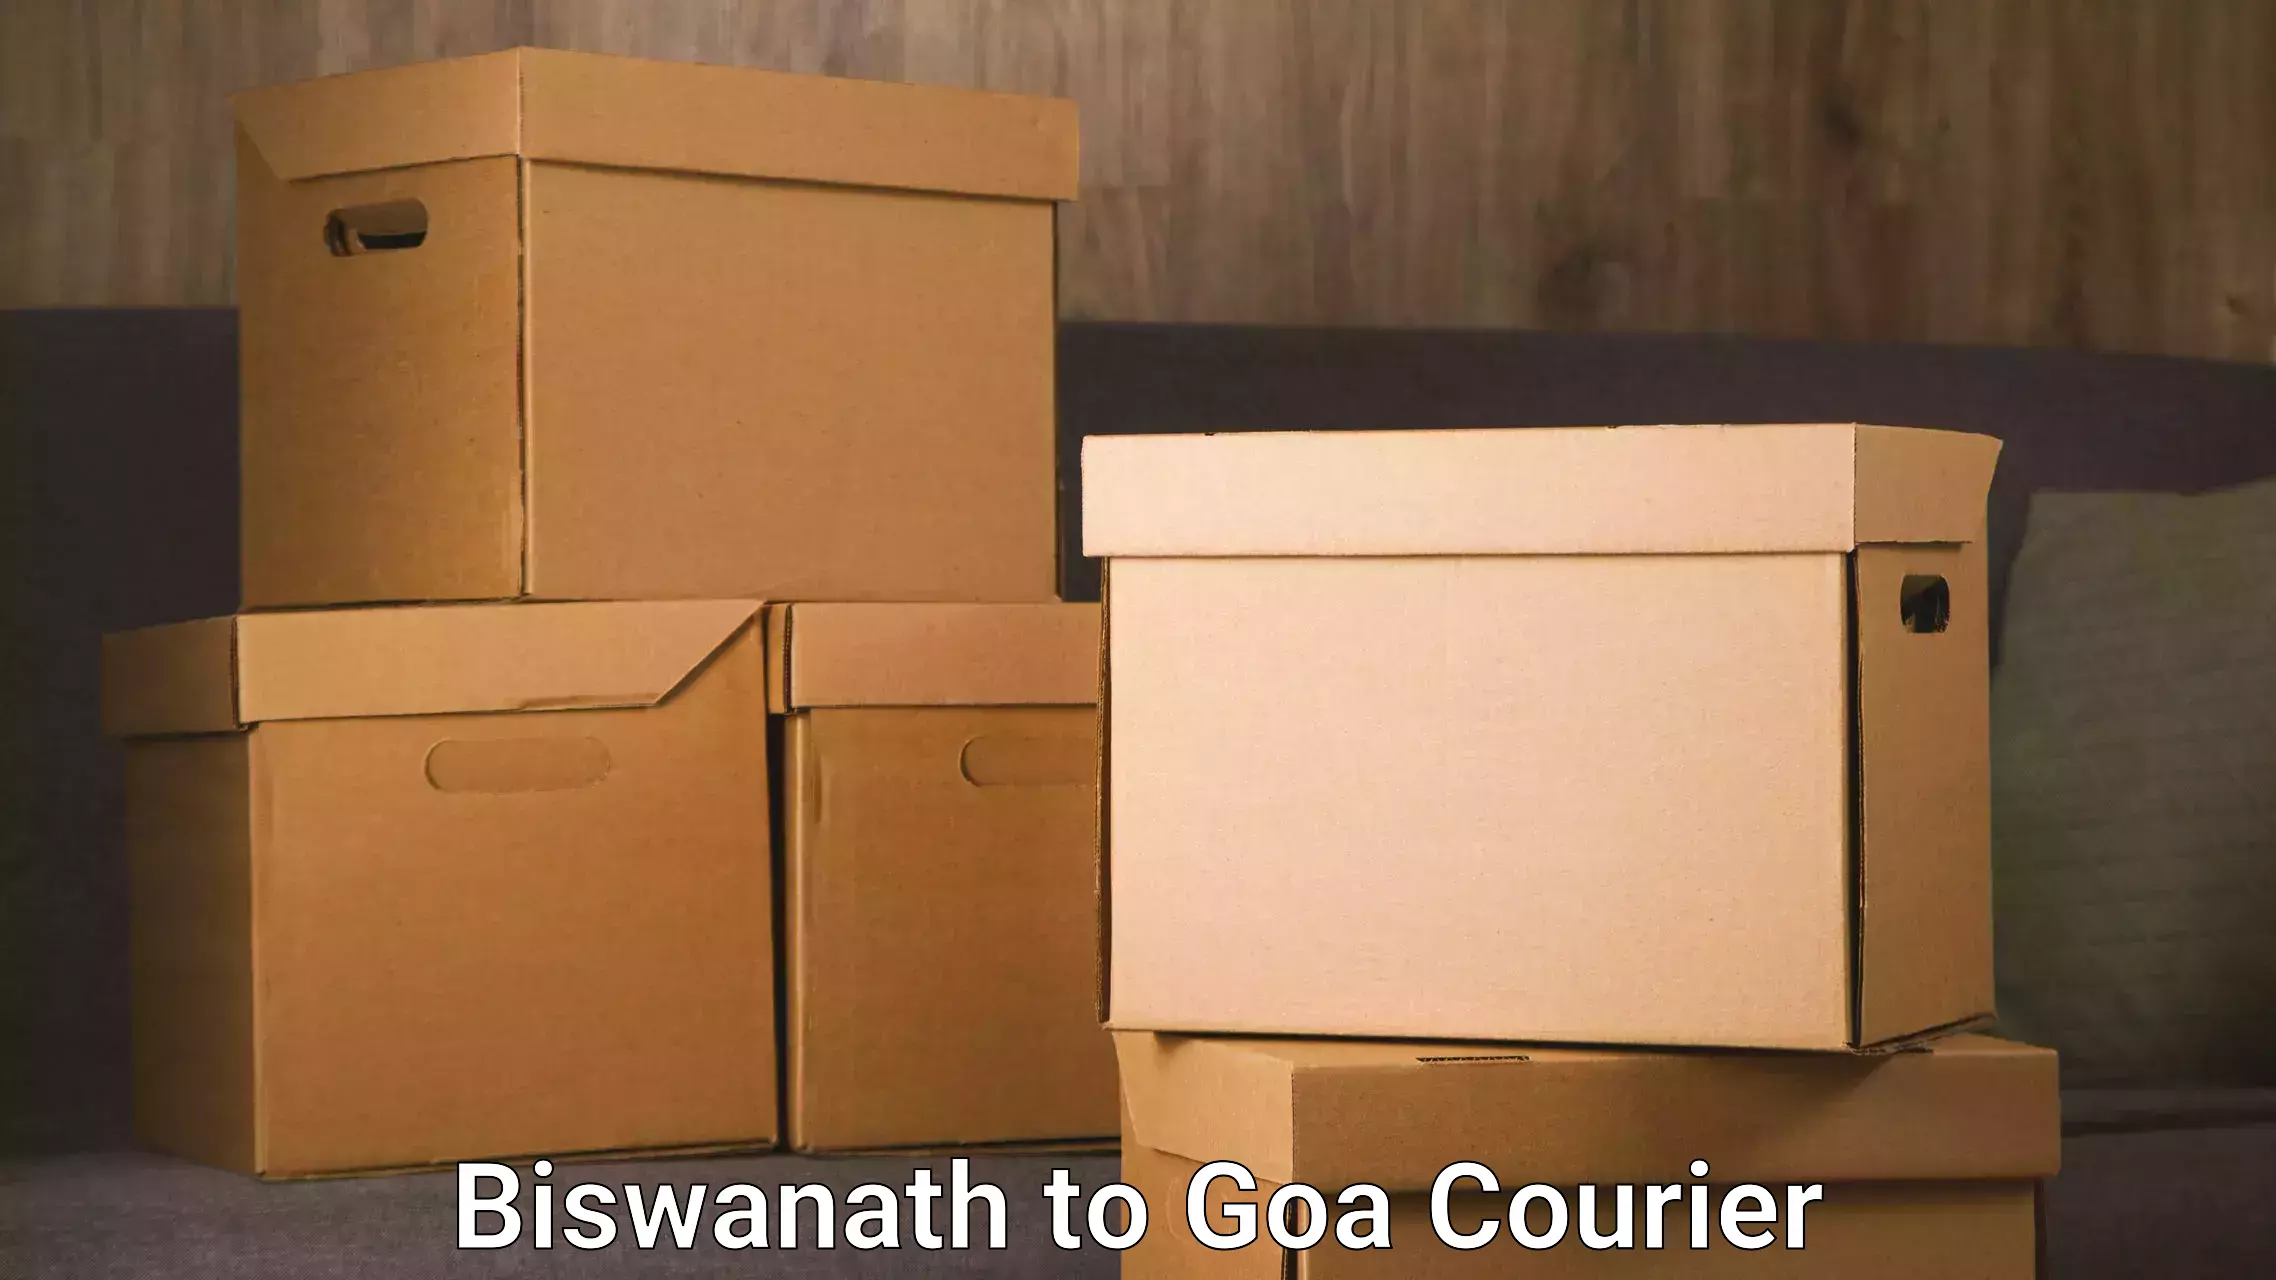 Efficient order fulfillment in Biswanath to Goa University